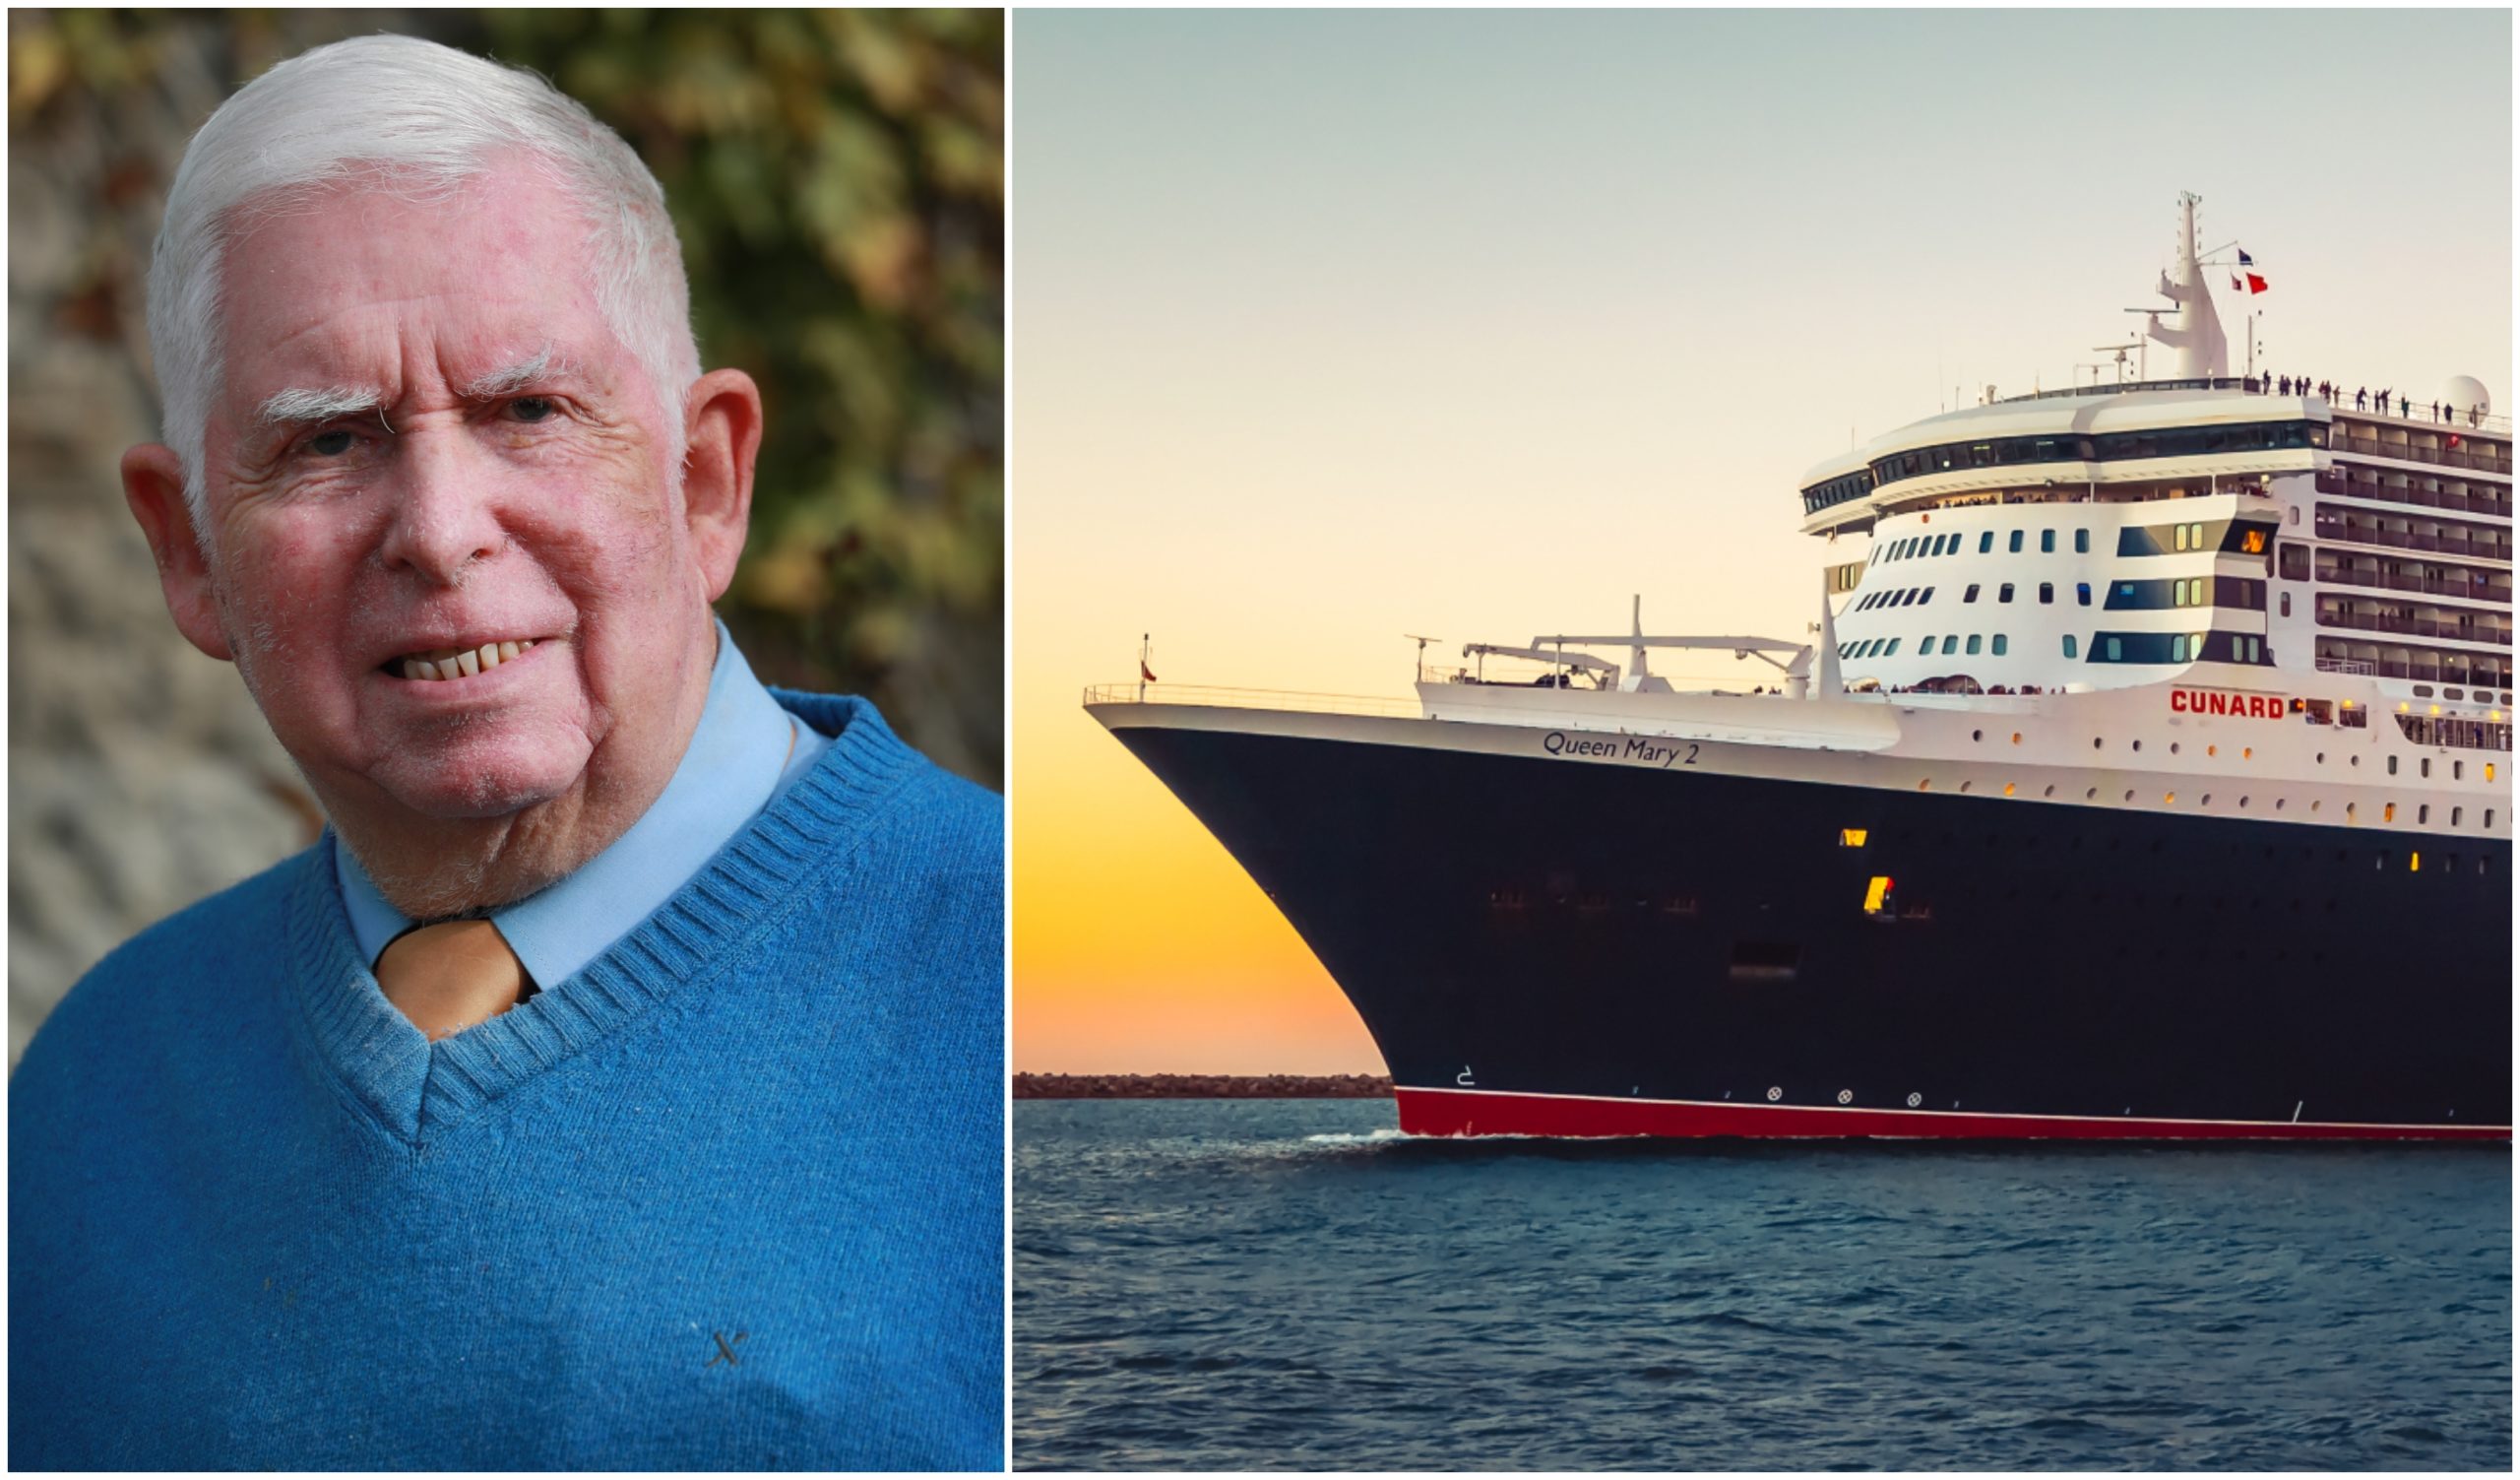 Bill Fyfe Hendrie's dream trip on the Queen Mary 2 was disrupted by the pandemic